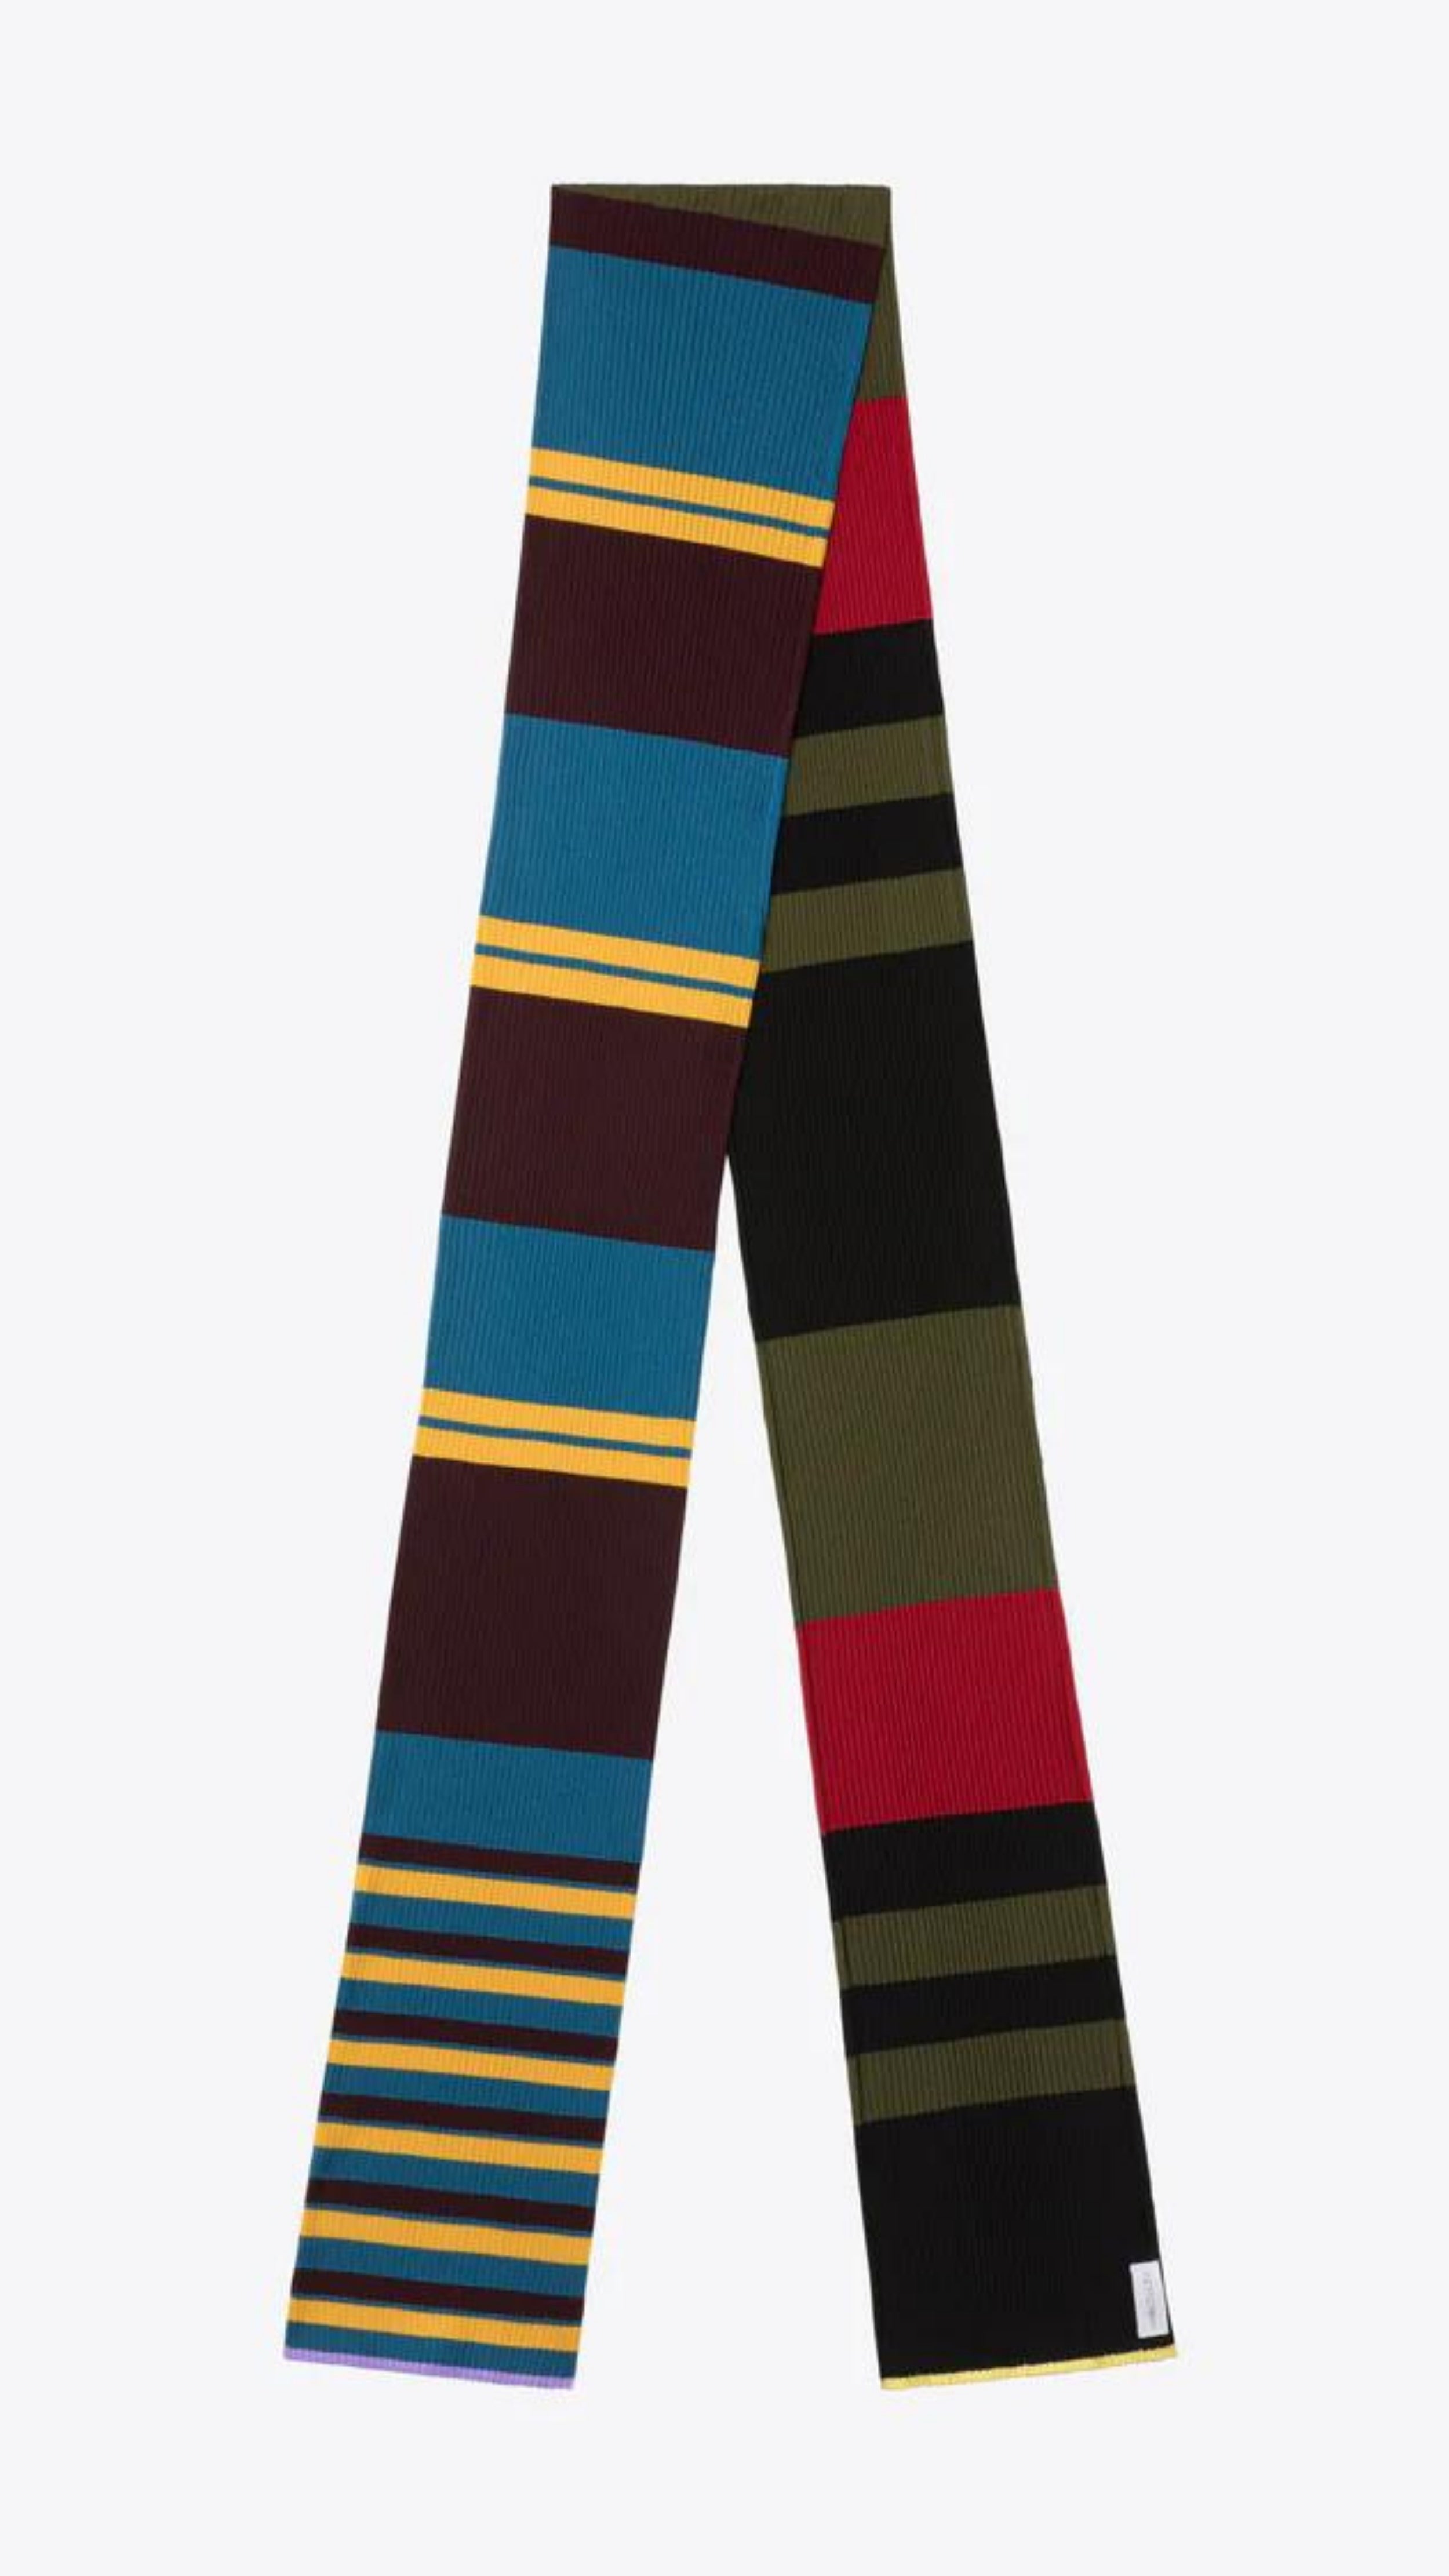 Colville AZ Factory Molly Molloy Lucinda Chambers, Color Block Striped Scarf. Extra long thin scarf with varying stripes in blue, burgundy, yellow, black, and olive green. Photo showing product from above. 